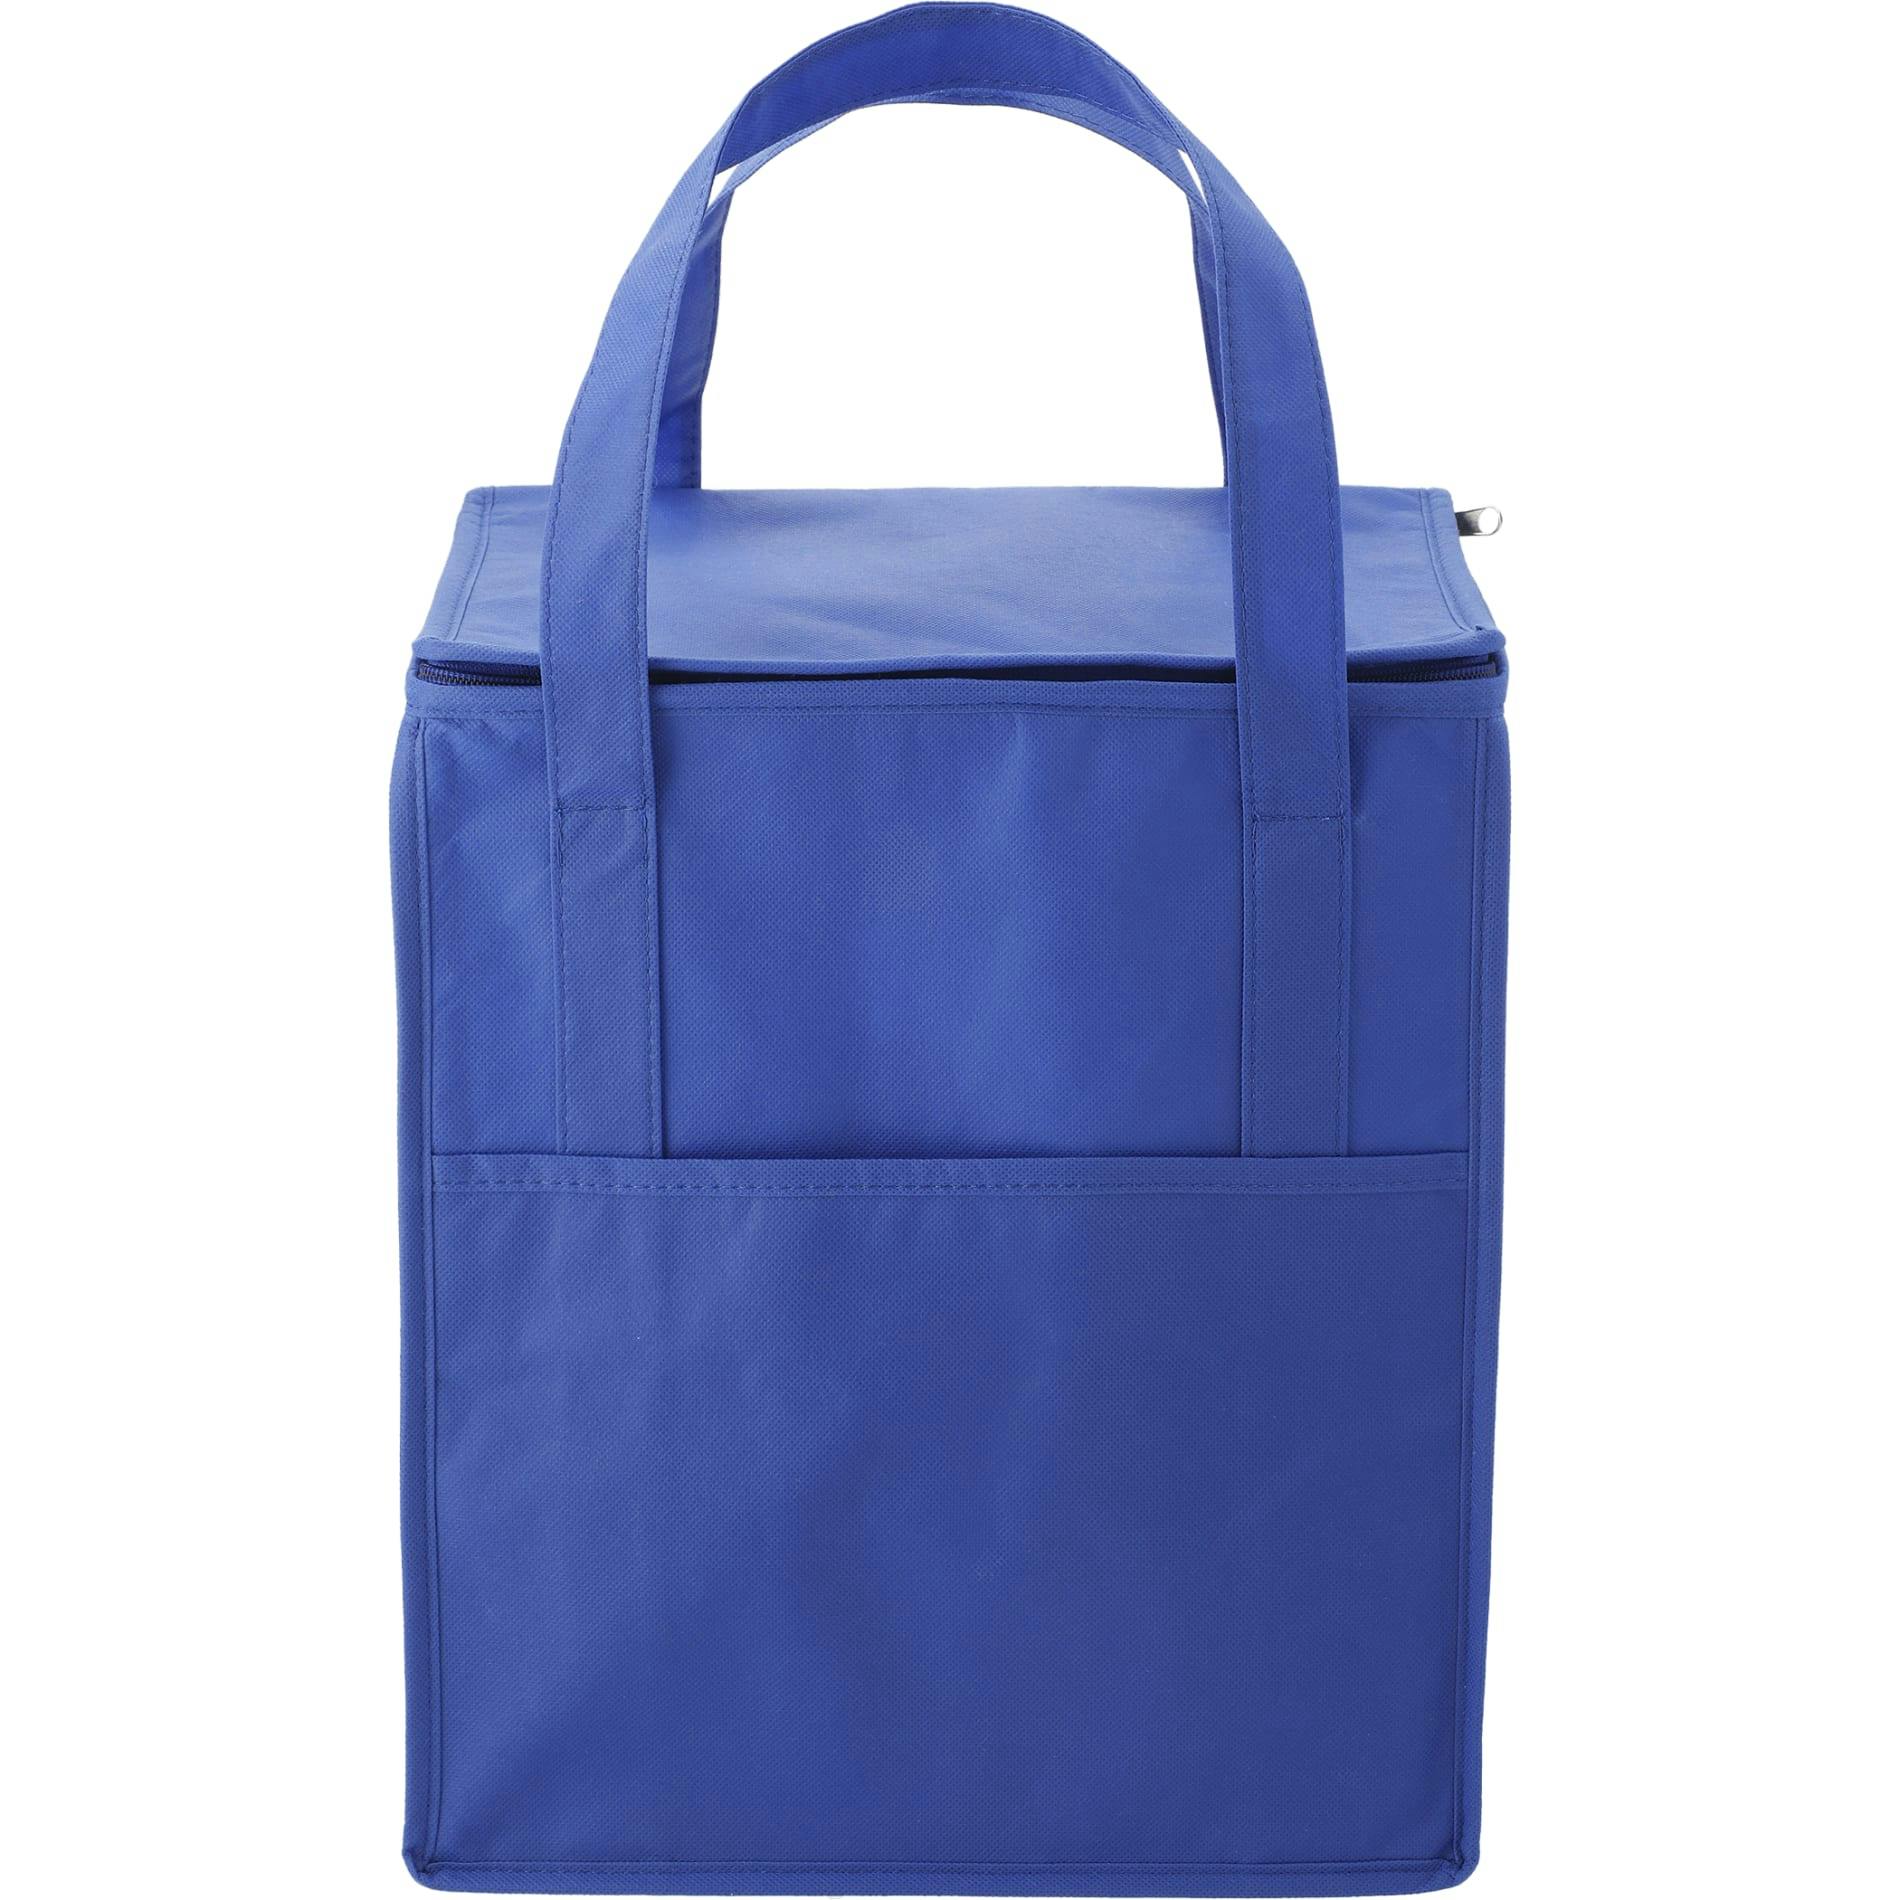 Hercules Flat Top Insulated Grocery Tote - additional Image 5